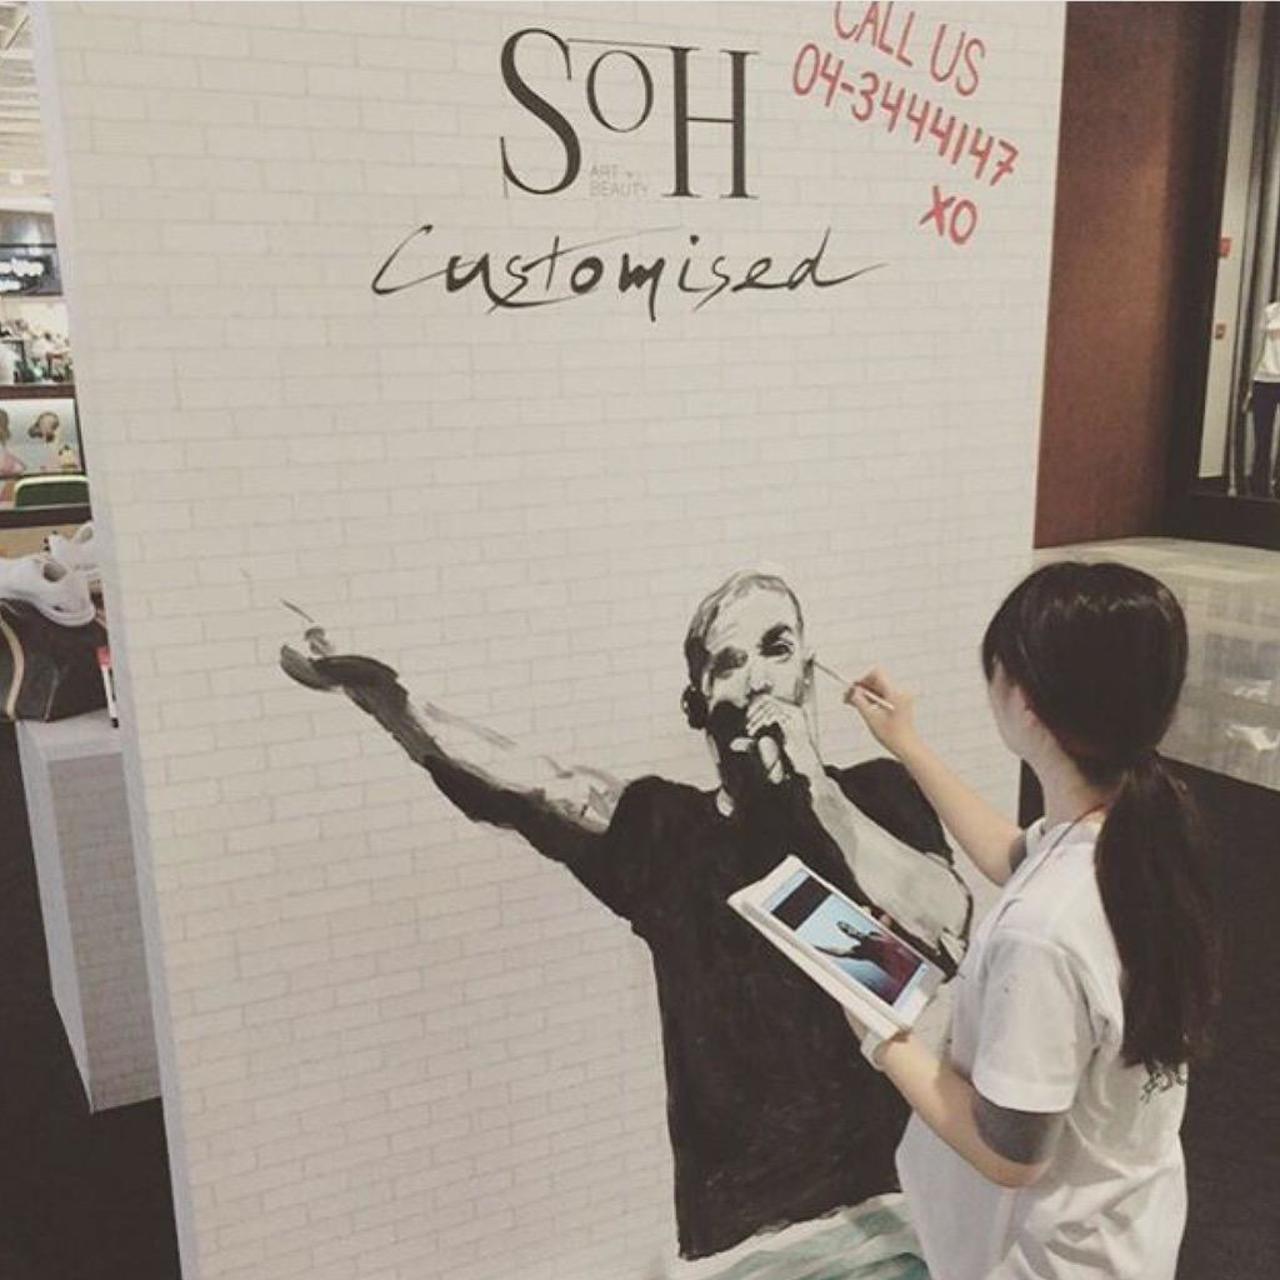 That's what's up at Galleria Mall thanks to @SoHdubai #StreetArt #Graffiti 
Time to customize your  http://t.co/o8zL0XFjs1